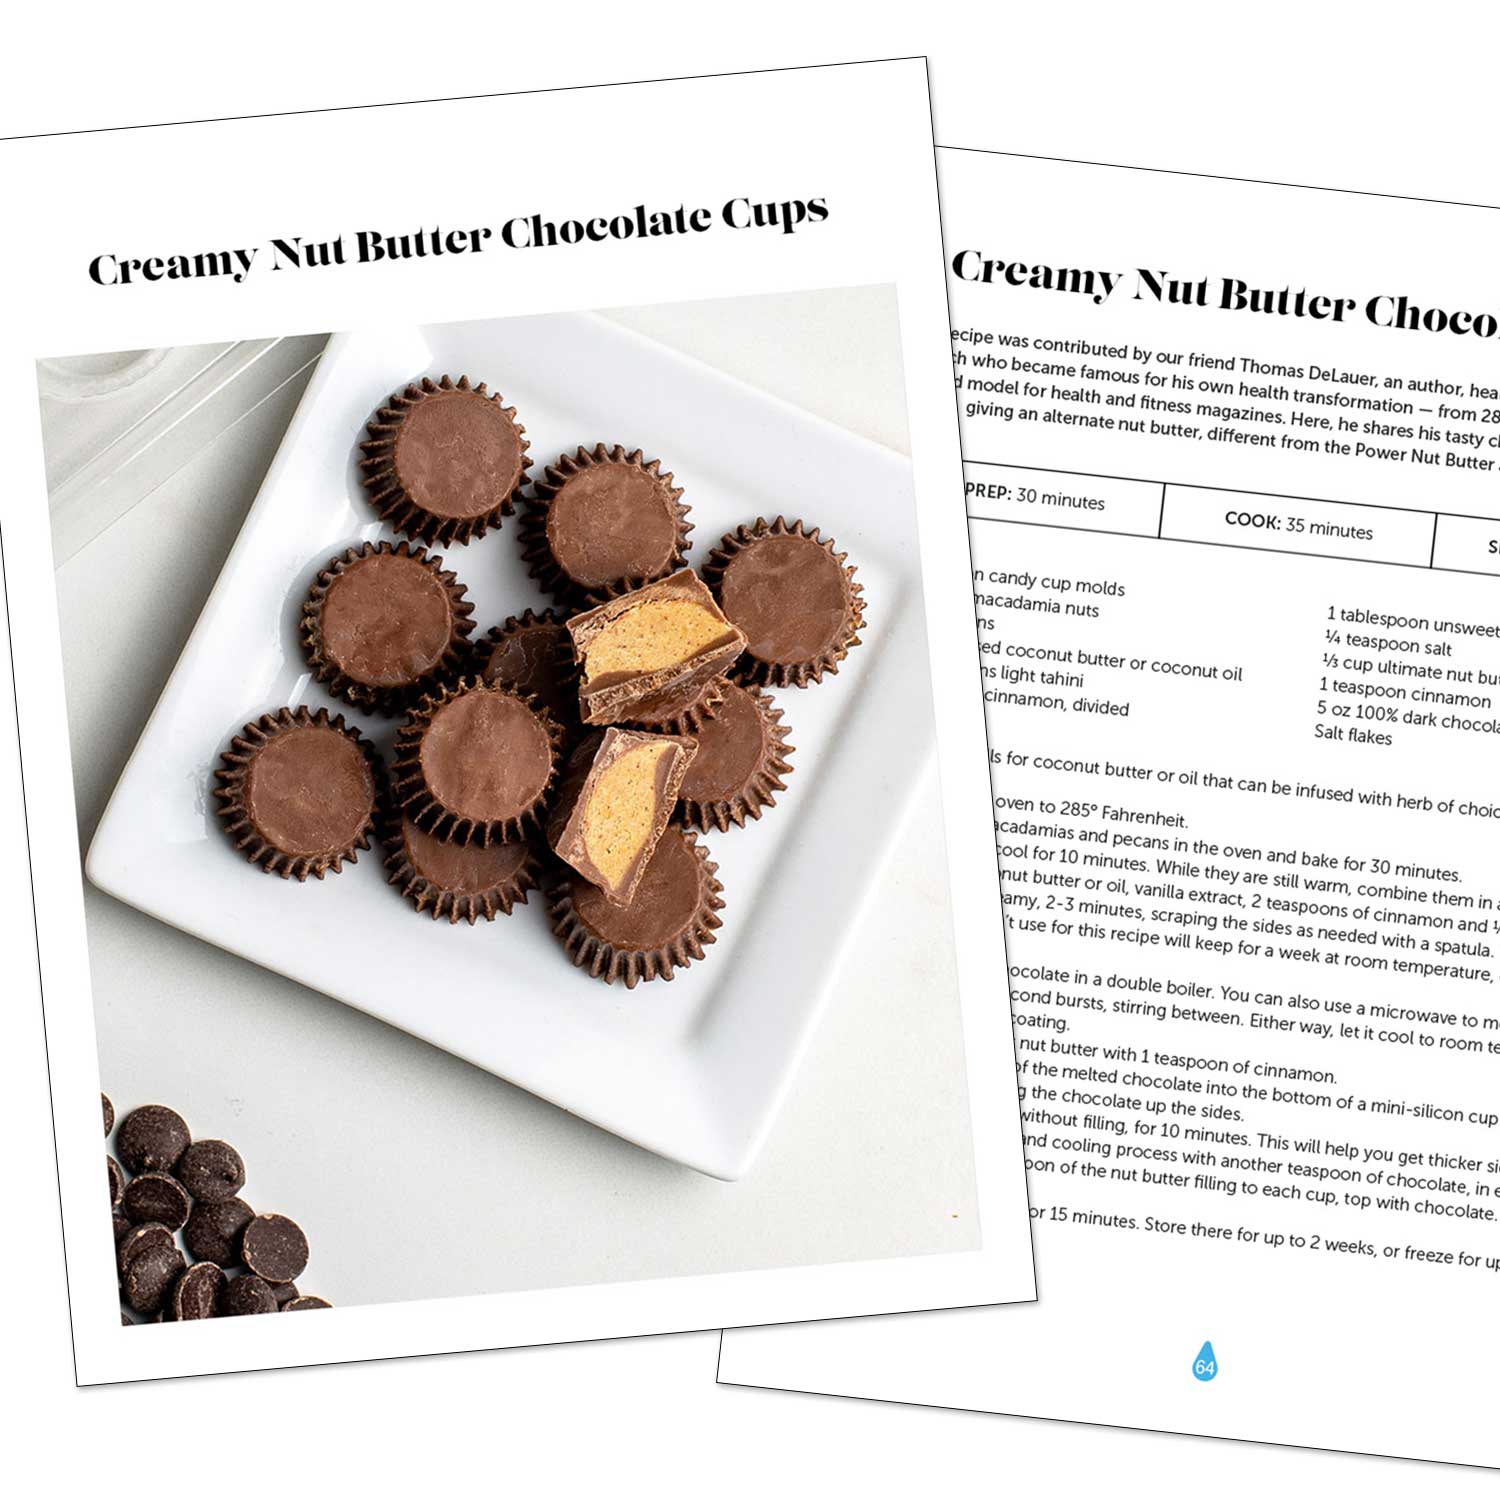 Creamy Peanut Butter Chocolate Cups that are infused, ketogenic, AND gluten-free?! Get the recipe for these keto chocolate peanut butter cups when you get LEVO's keto digital cookbook PDF download. Enjoy dessert once in a while with these tasty sweets. Download the cookbook from LEVO oil today and start living a healthier life with the keto diet.